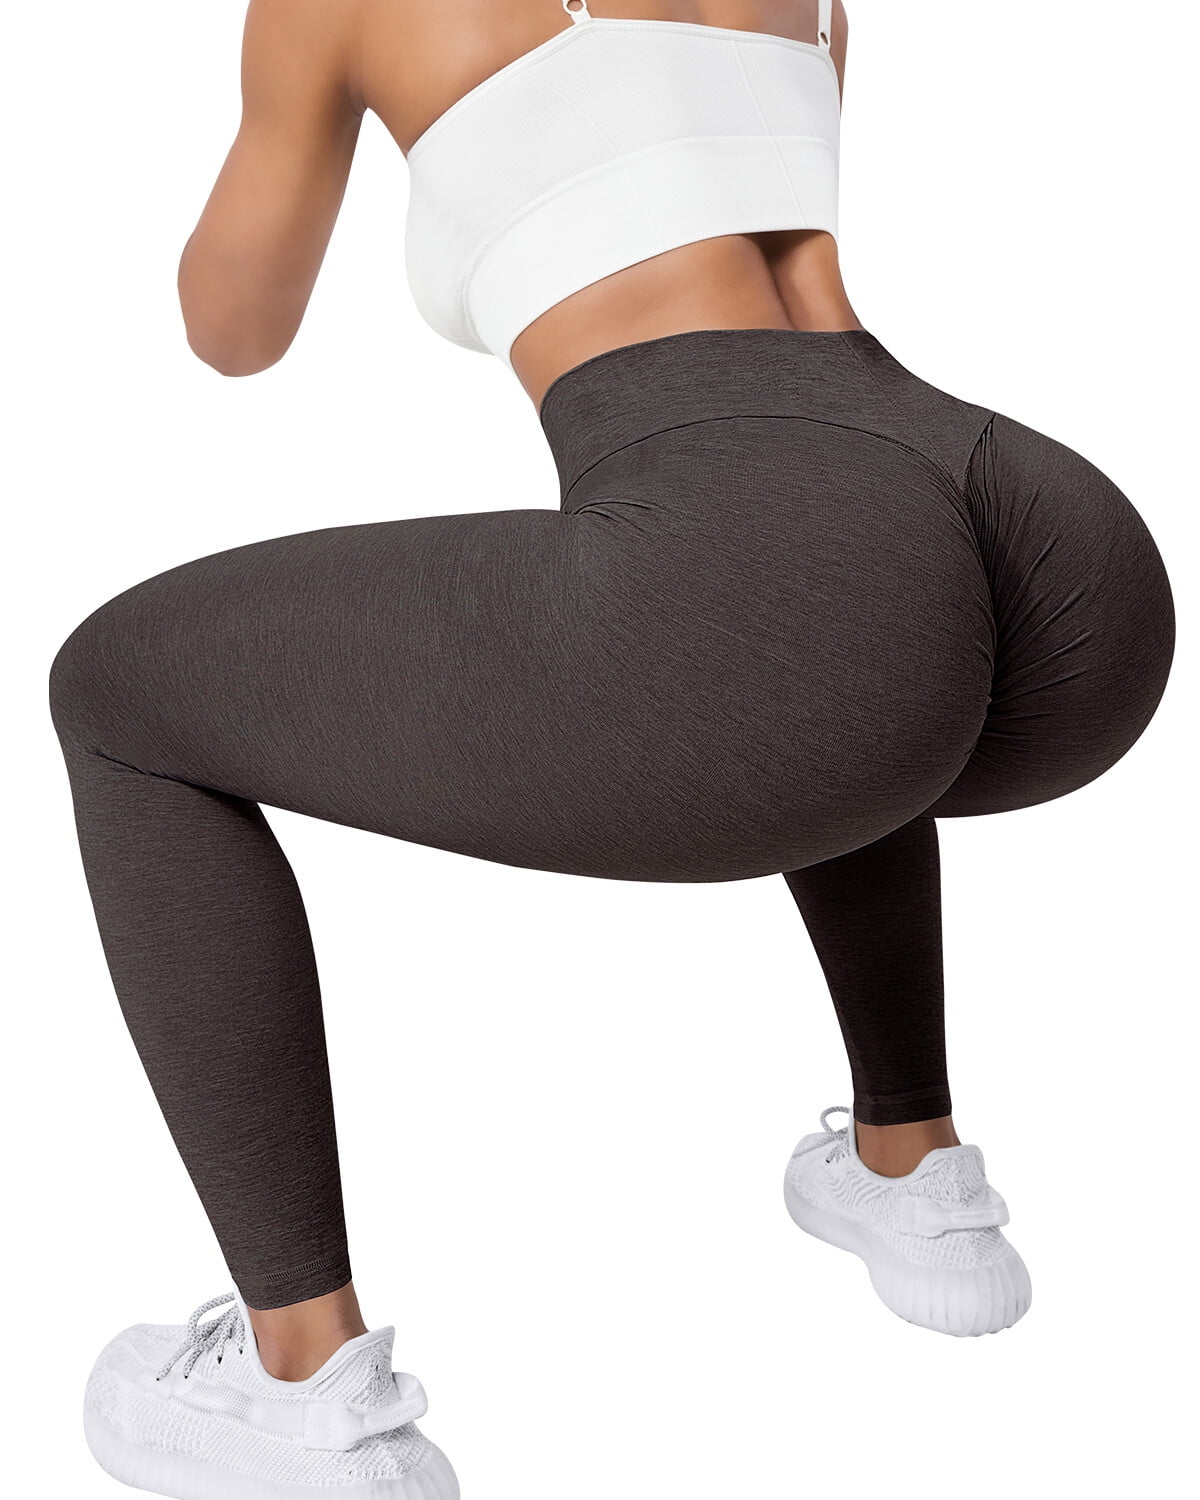 Gym Leggings Women Clothing Push Up Booty High waist Legging Workout Tights  Fitness Yoga Pants Stretchy Amplify Sports Clothing